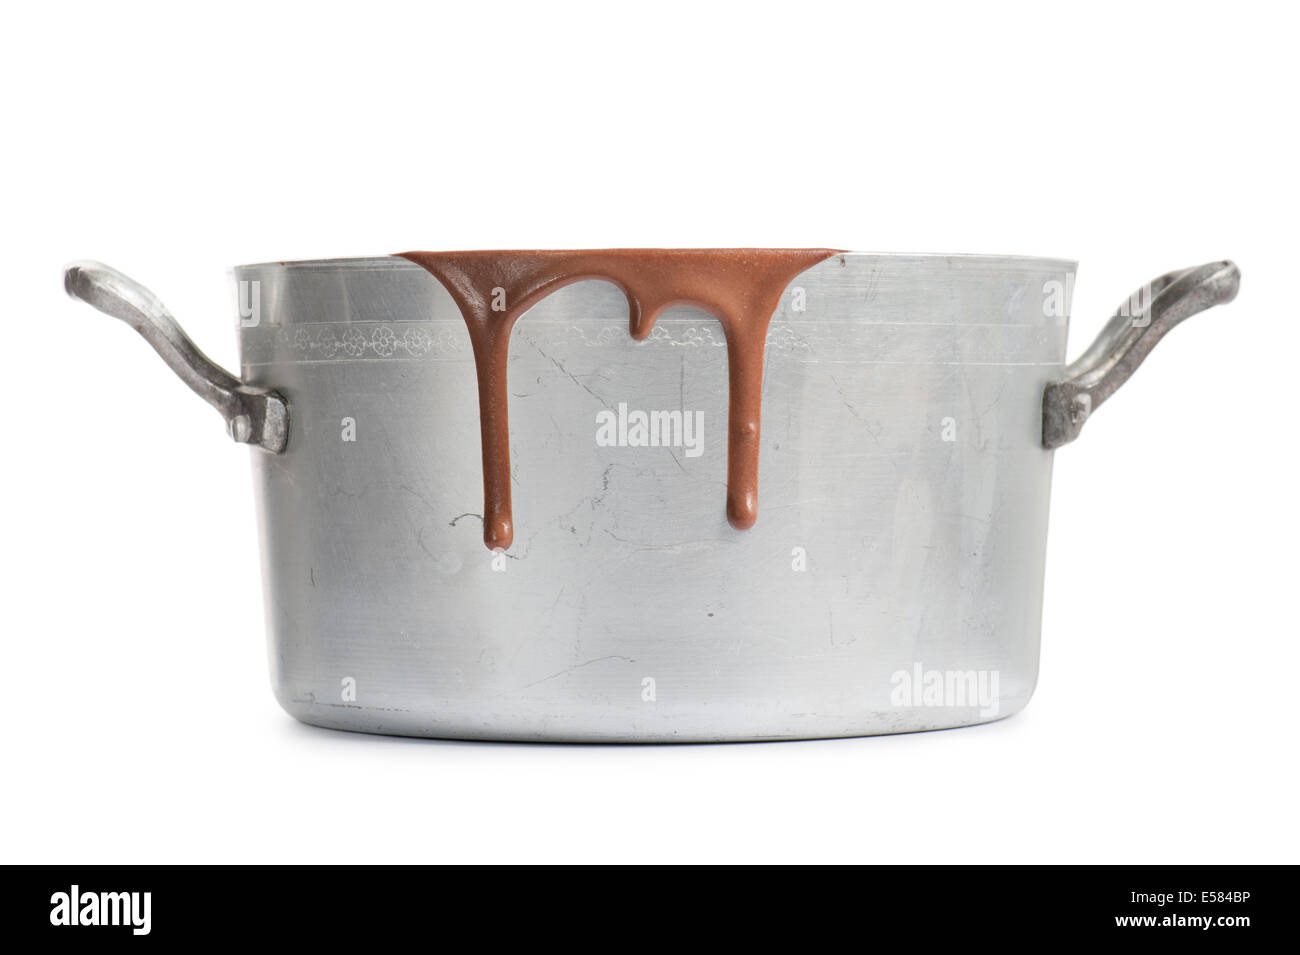 old aluminum pot with hot melted chocolate dripping, on white background Stock Photo